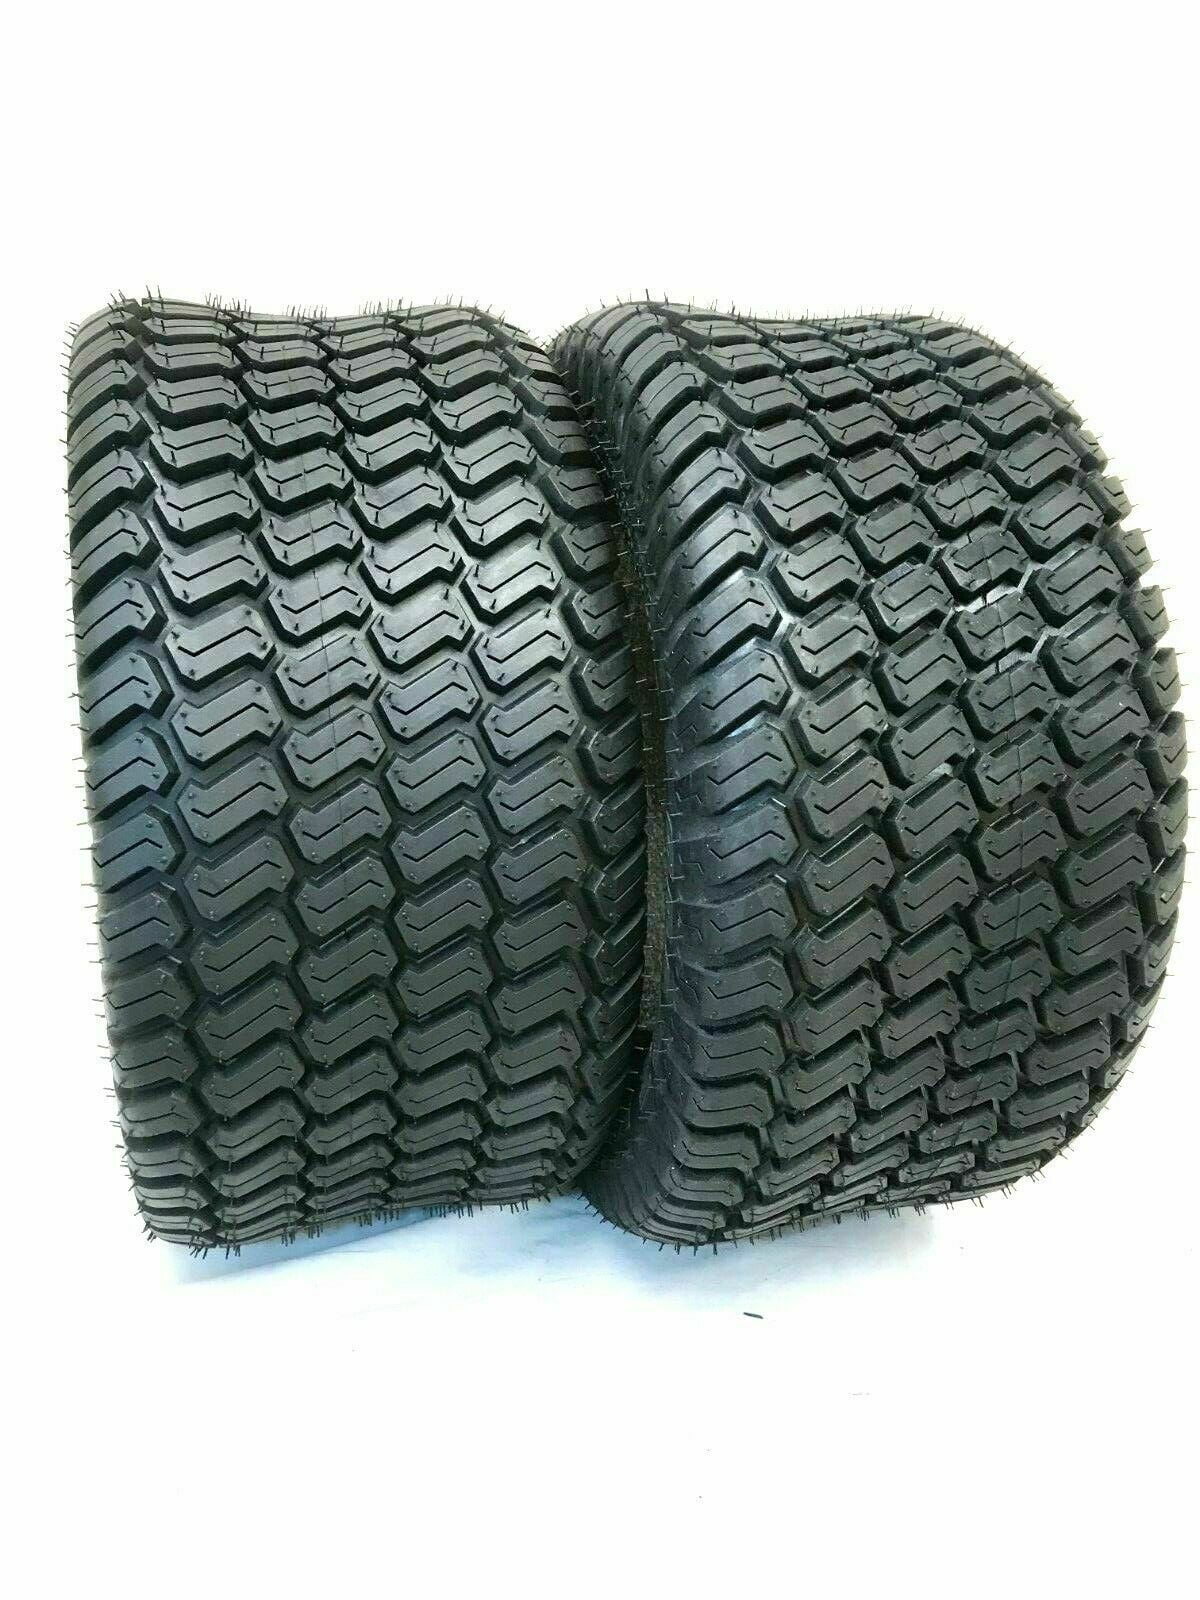 2 16x650x8 16x6.50x8 16x6.50-8  TURF TIRES 4 Ply Tubeless Tractor Rider Mower 